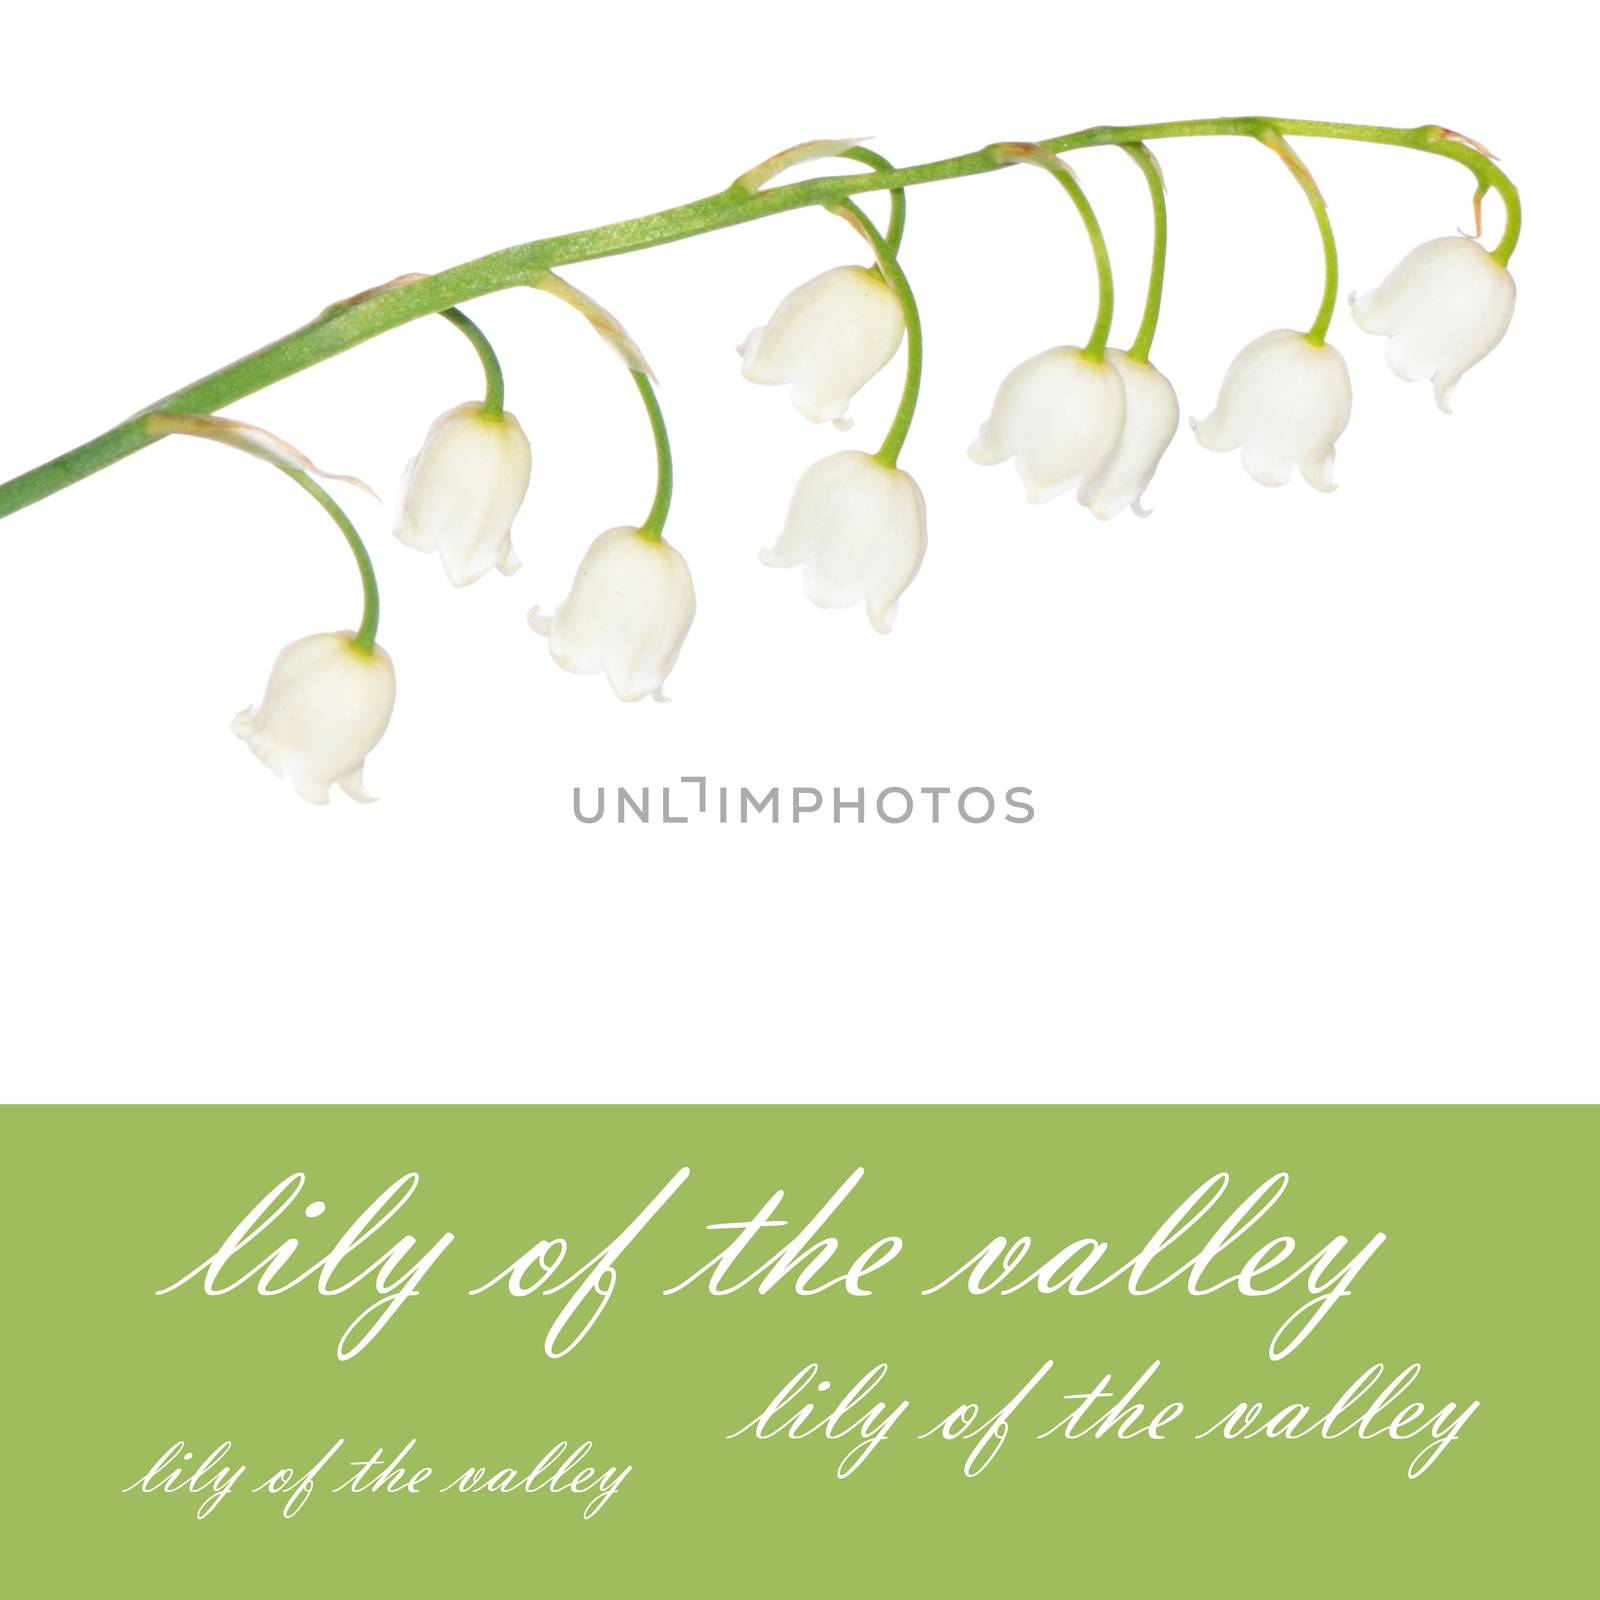 Lily of the Valley isolated on white